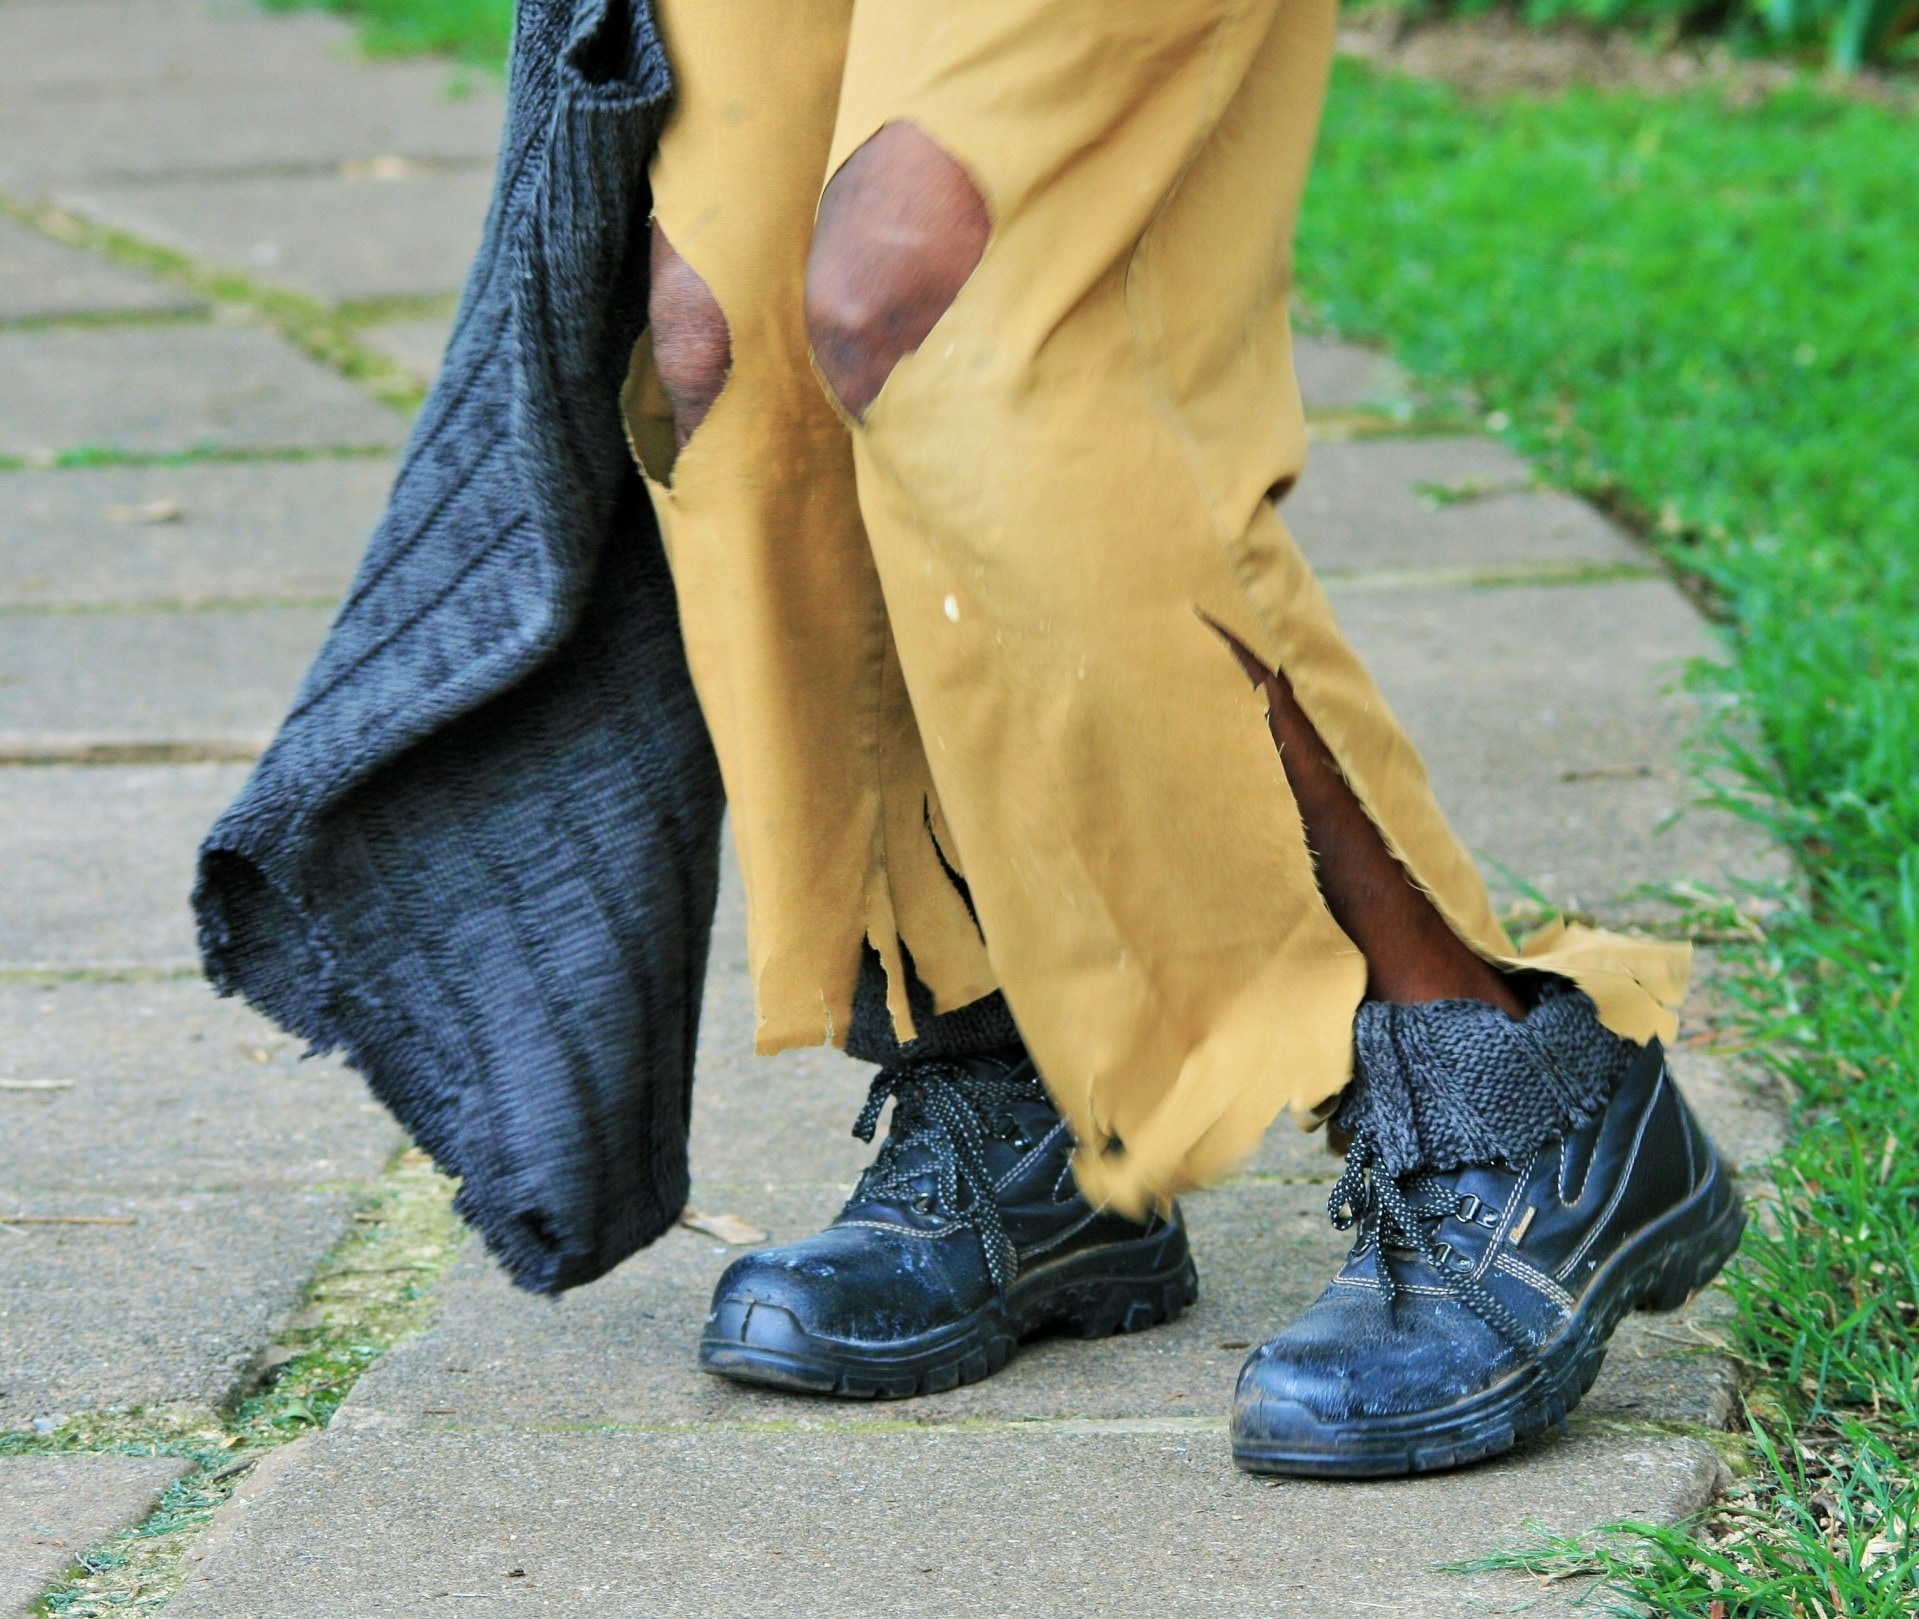 Hobo, Homeless, Torn, Vagrant, Clothing, low section, human body part